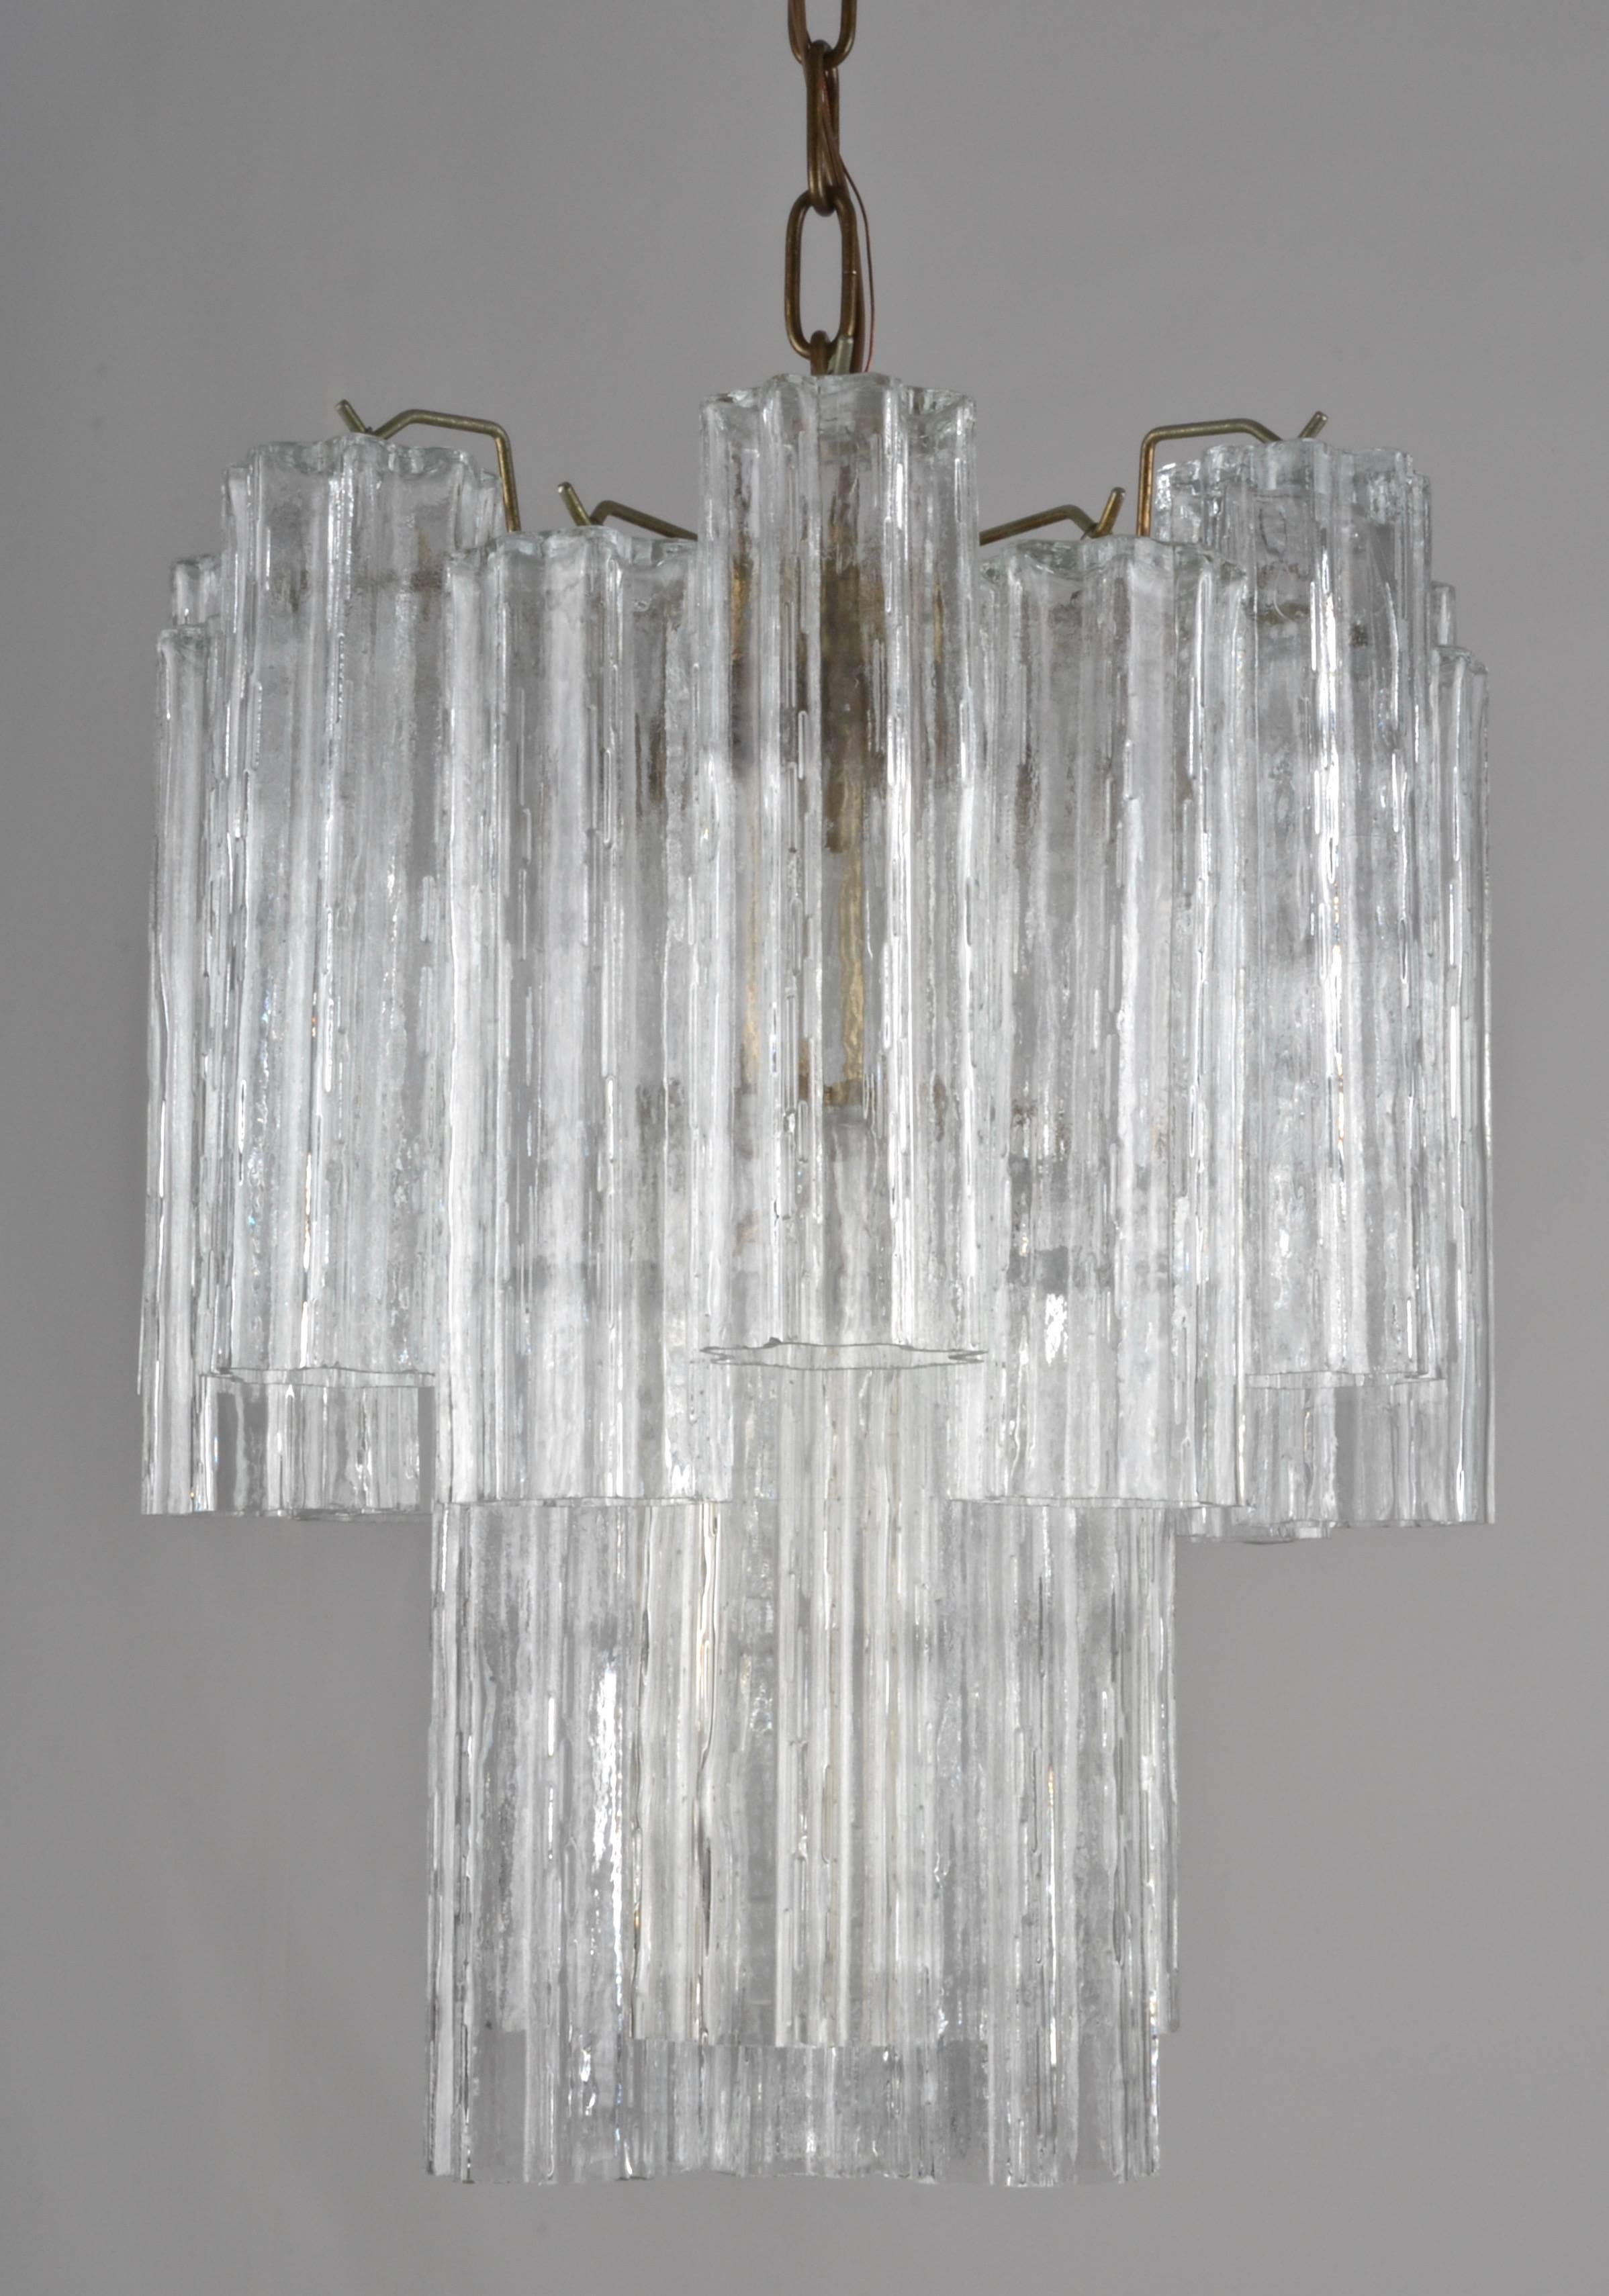 Very nice size and presence on this fixture, featuring the more detailed crenelation on the tubes than the standard. These have 8 channels vs the usual 5. Two tiers of crystals, each 10 inches by 3 inches. All new wiring, bronze brass chain and